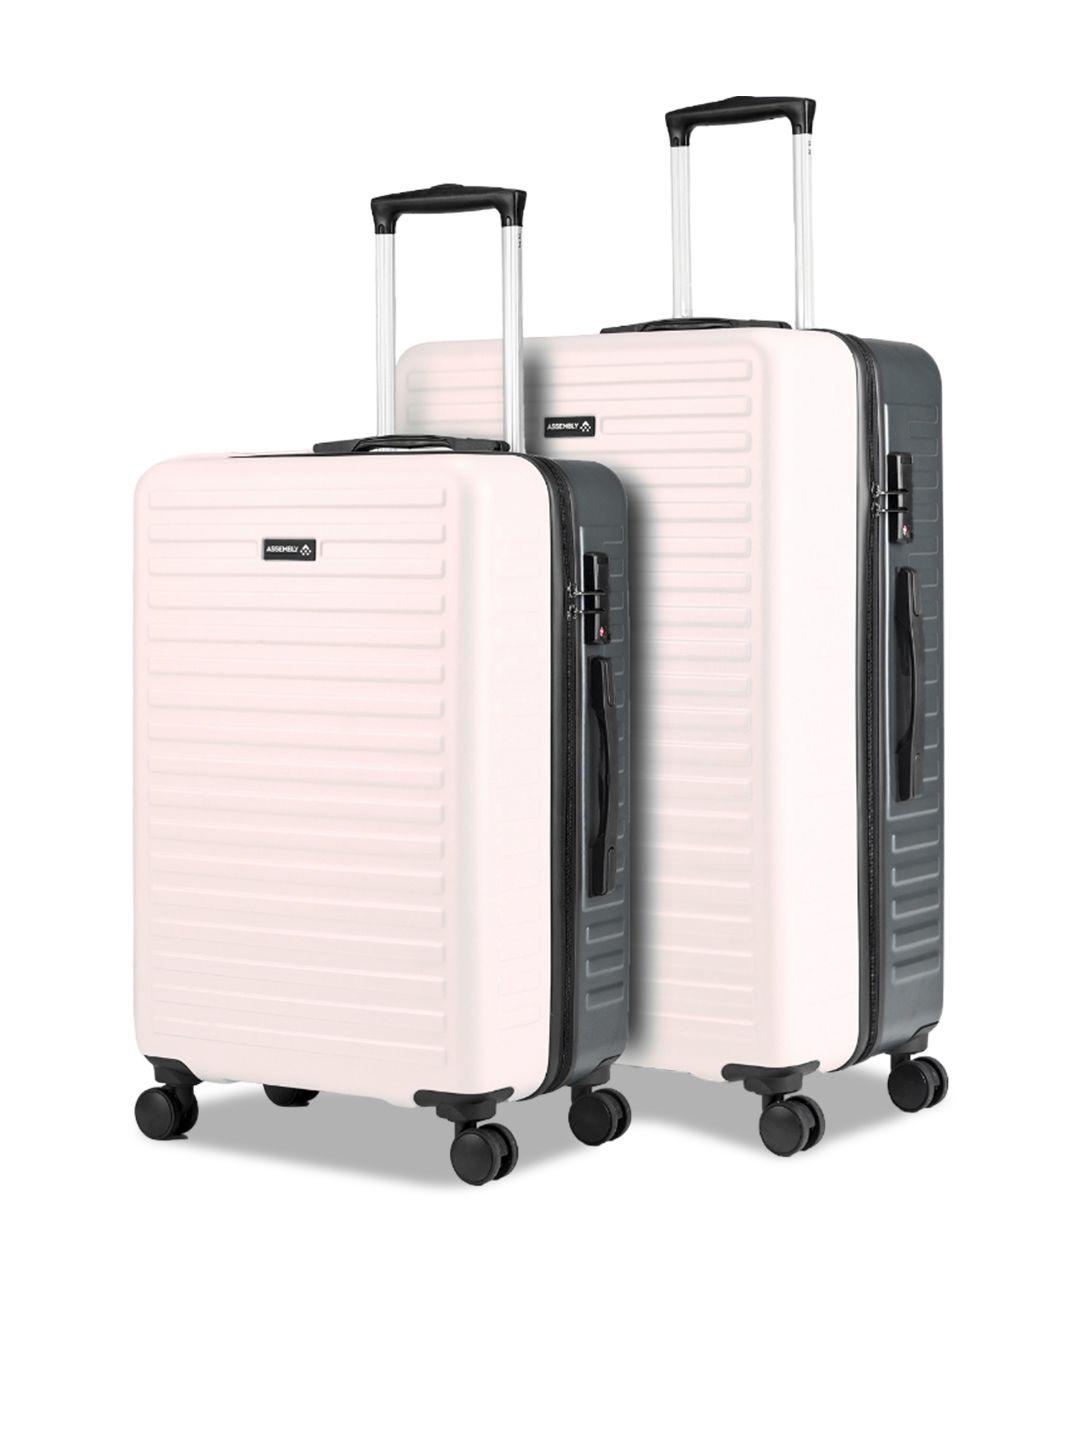 assembly set of 2 textured hard-sided trolley suitcases